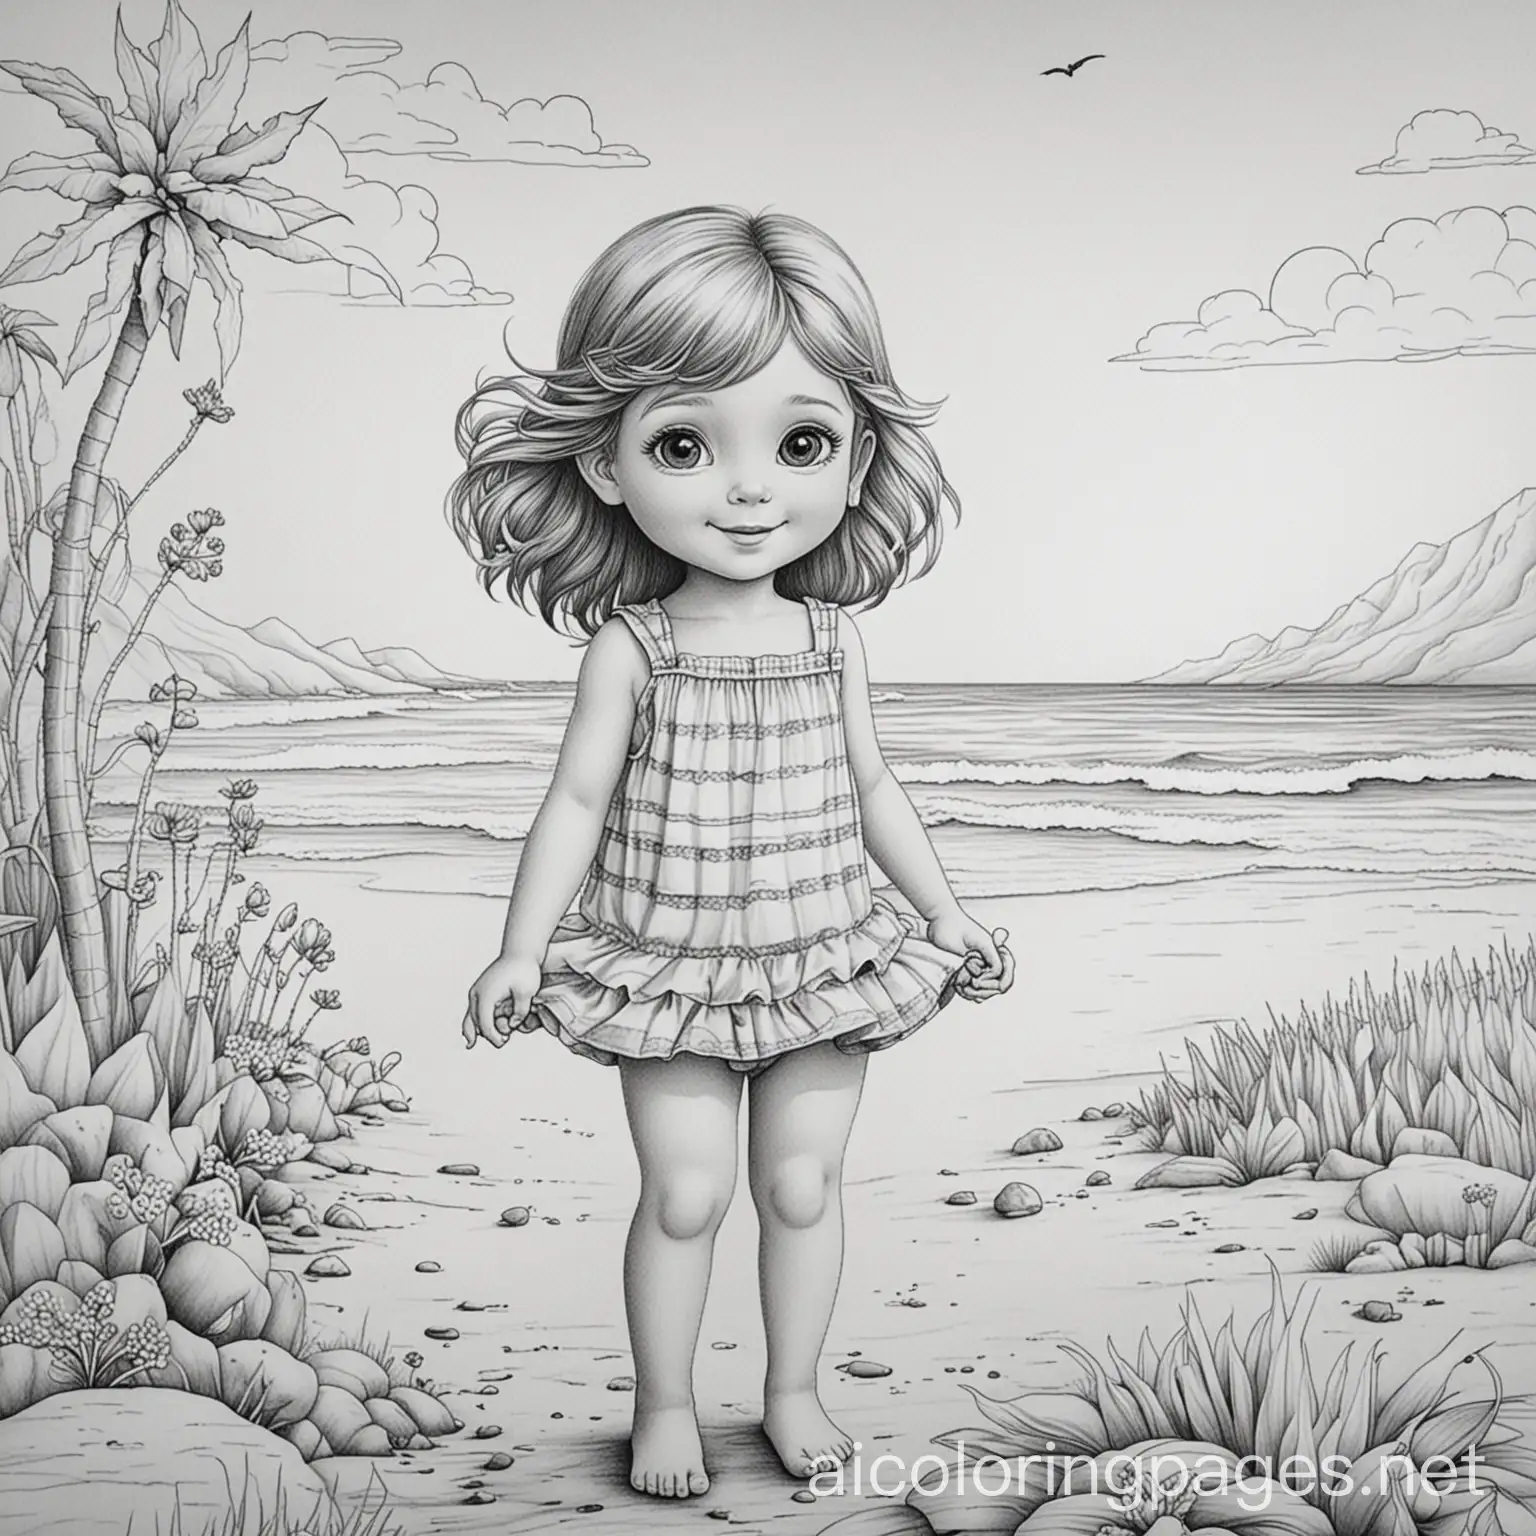 Grayscale summer, Coloring Page, black and white, line art, white background, Simplicity, Ample White Space. The background of the coloring page is plain white to make it easy for young children to color within the lines. The outlines of all the subjects are easy to distinguish, making it simple for kids to color without too much difficulty